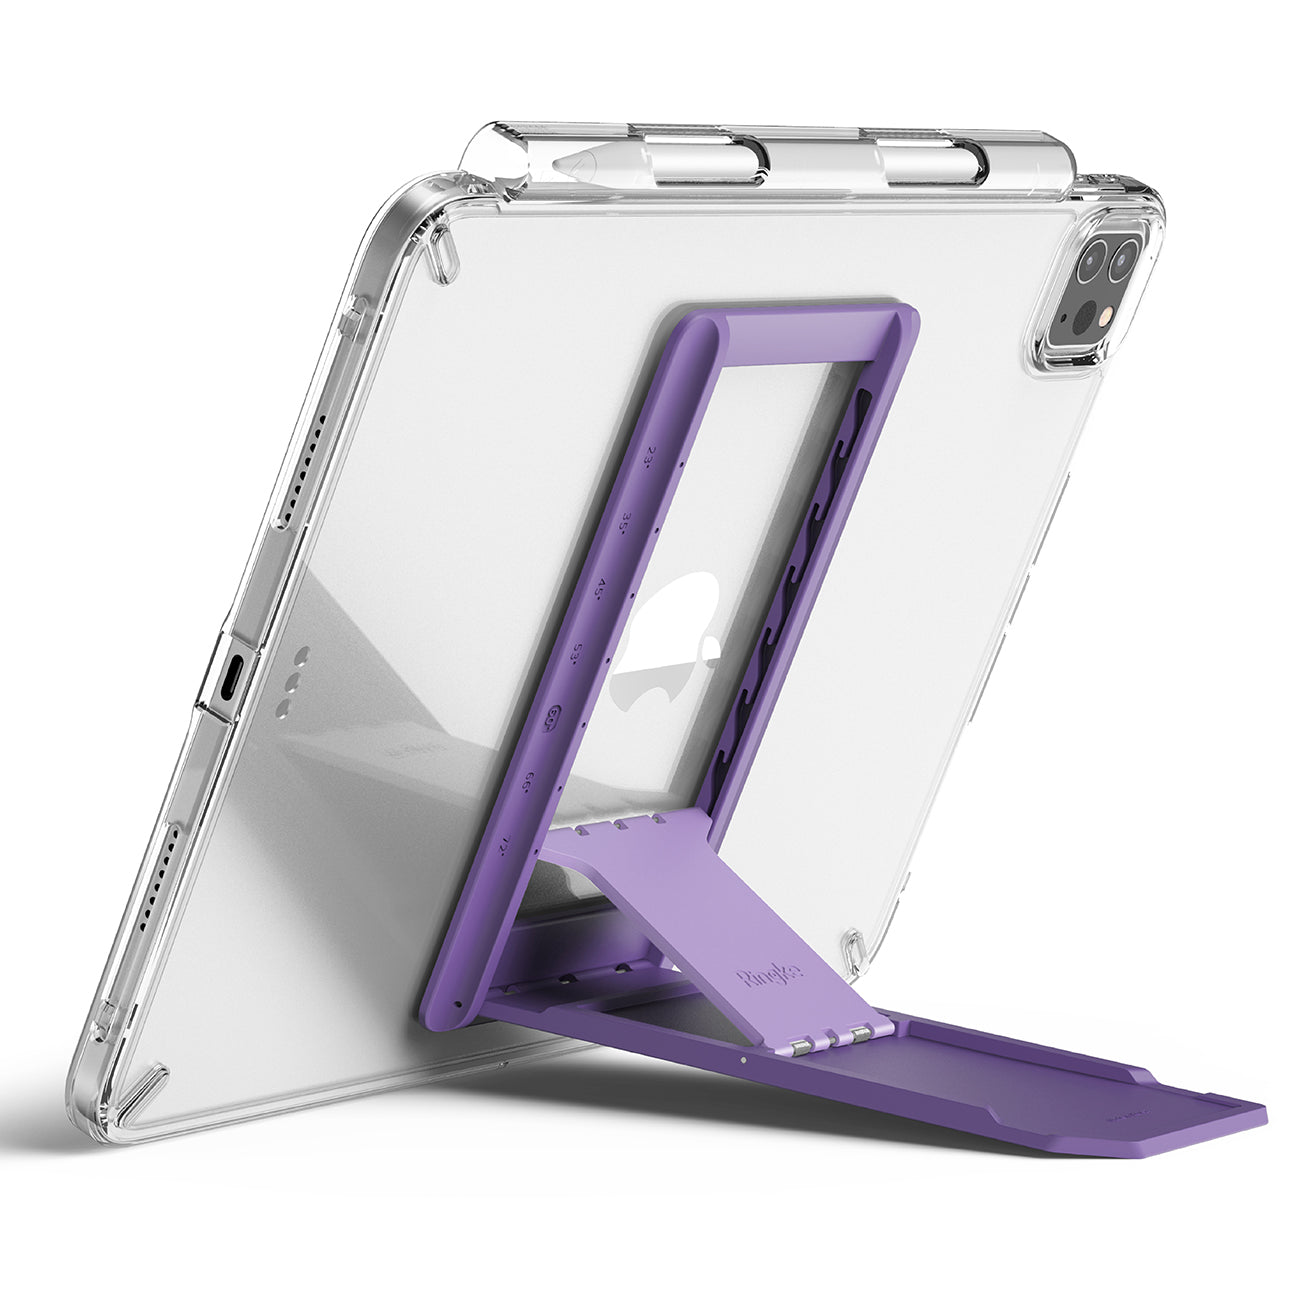 Outstanding | Tablet Stand